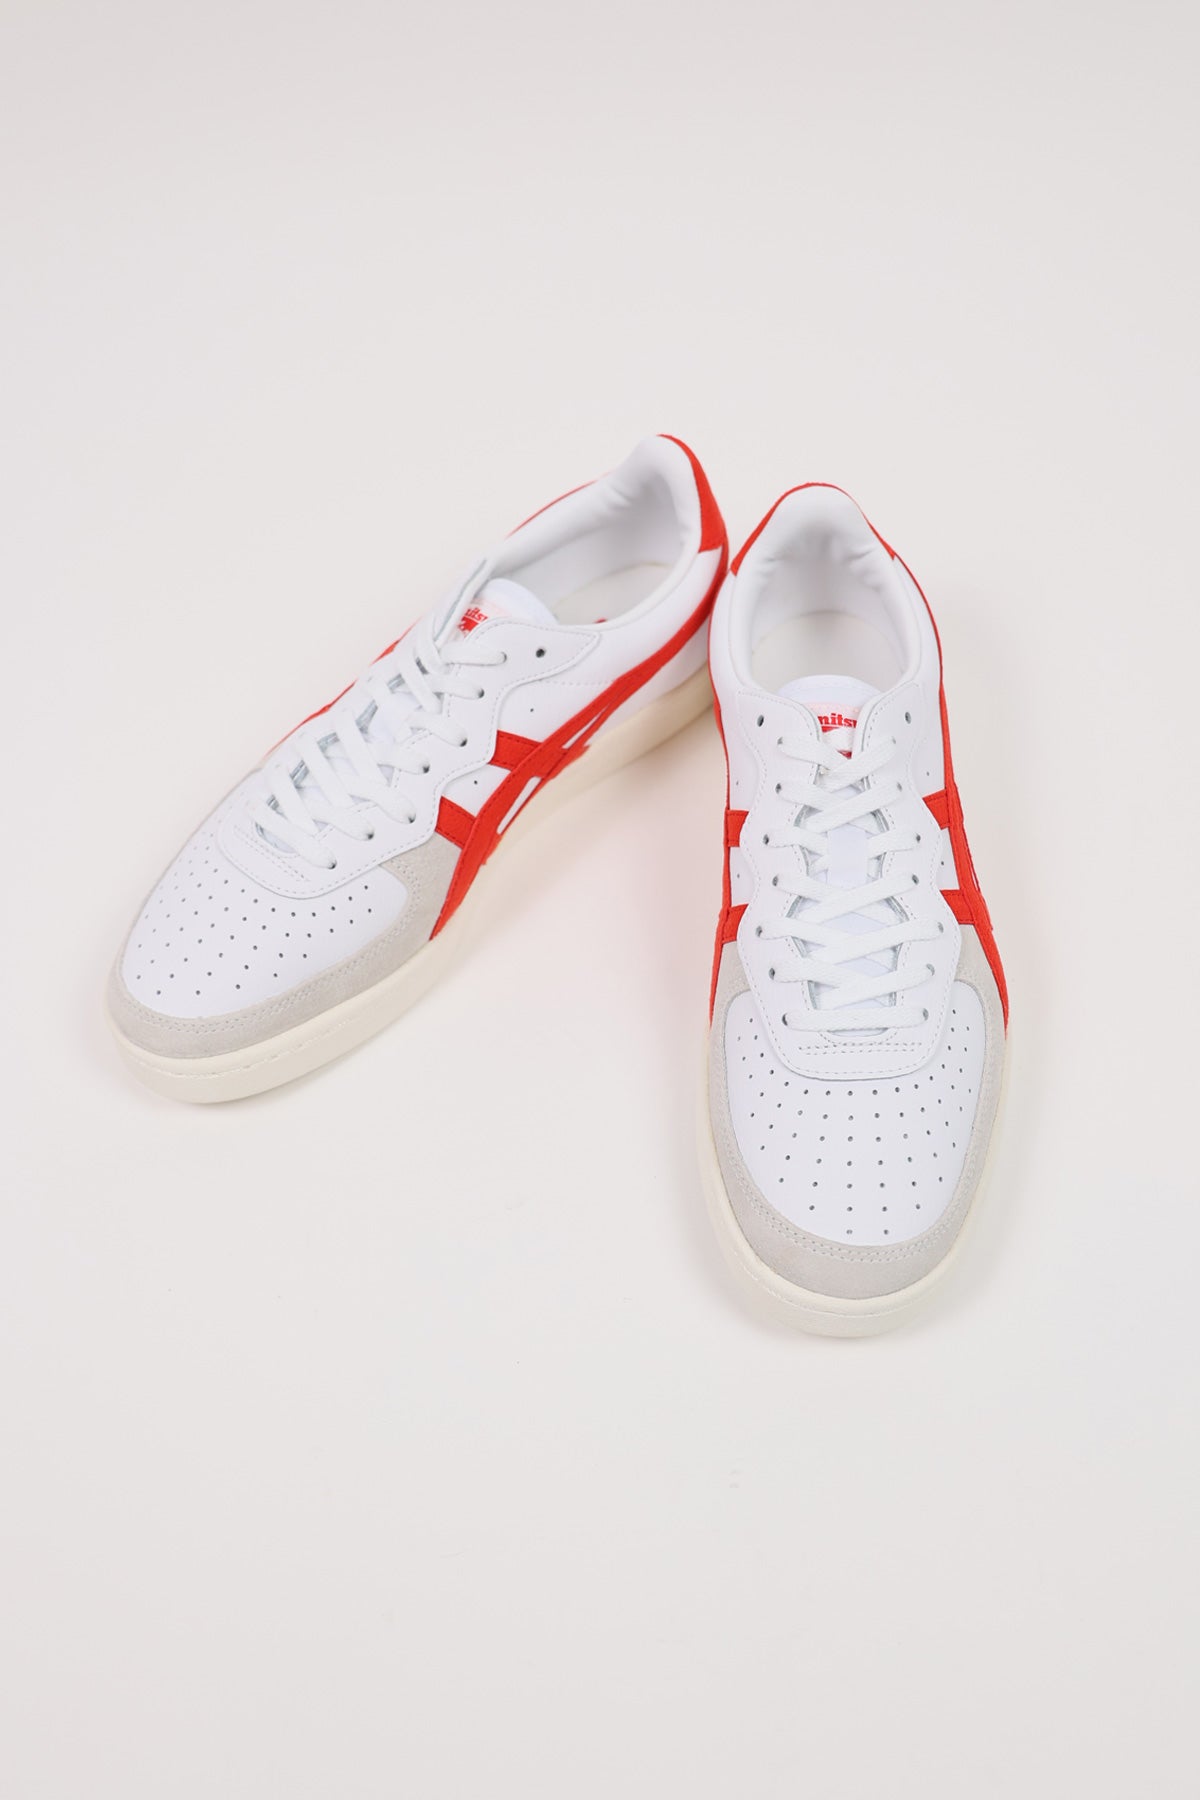 Onitsuka Tiger - GSM- White/Classic Red - Canoe Club